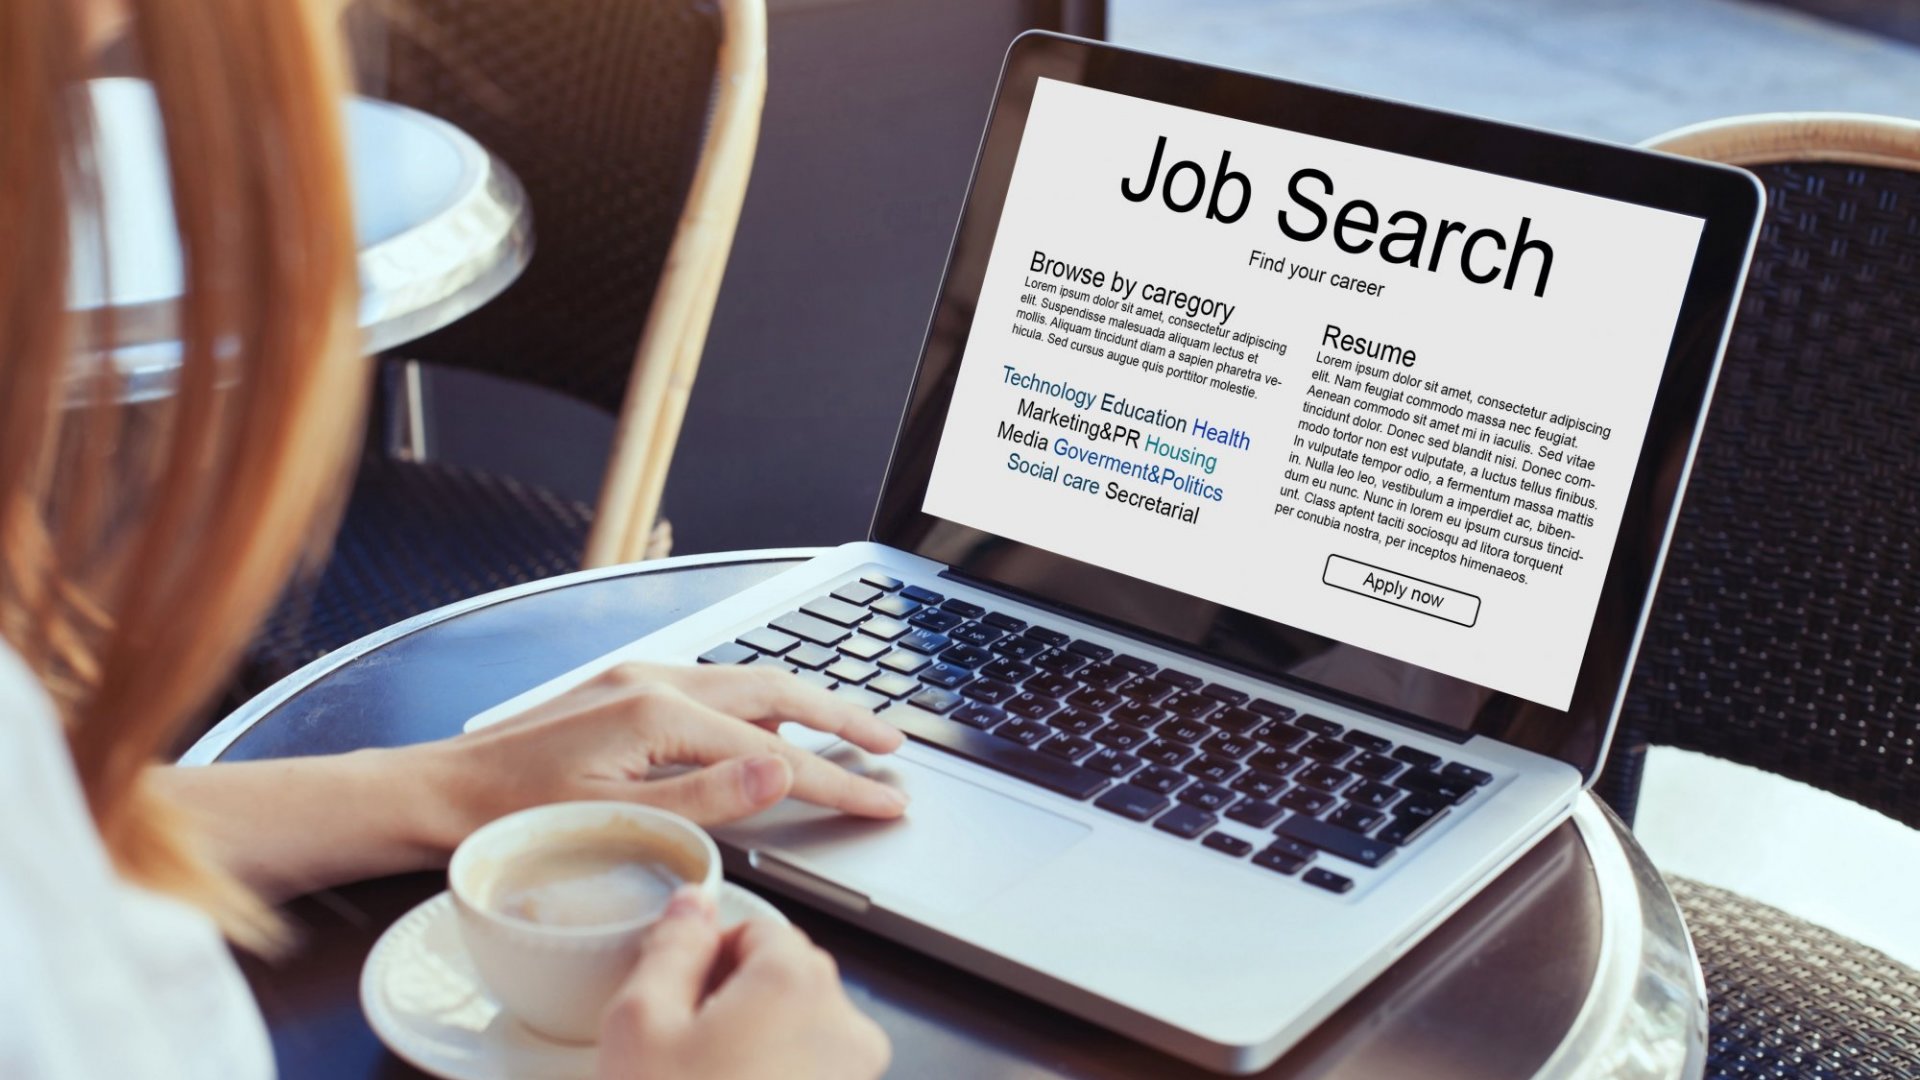 5 Great Tips To Find A New Job